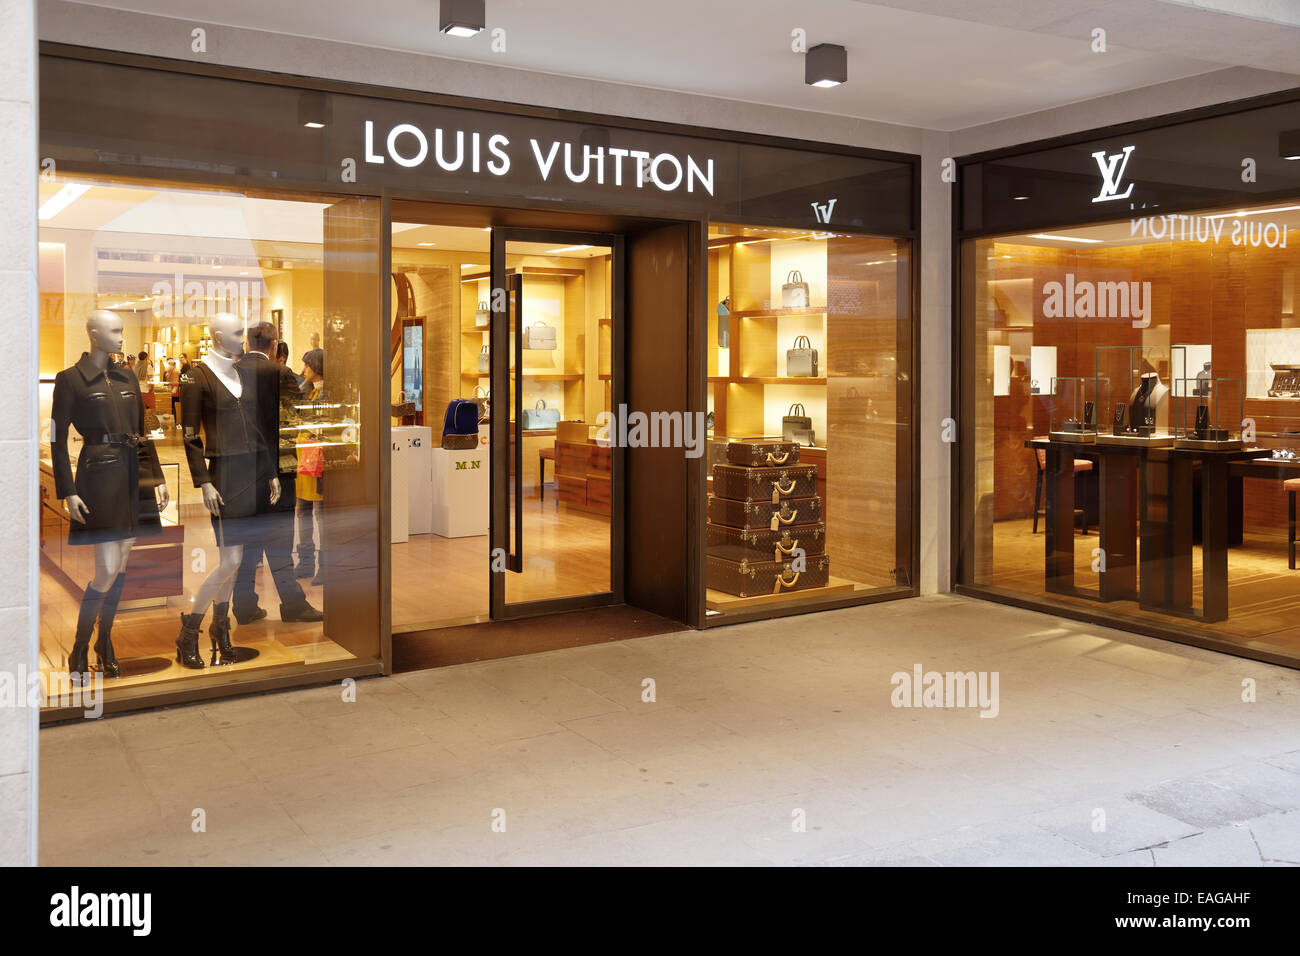 The Louis Vuitton store in Venice, Italy. Stock Photo